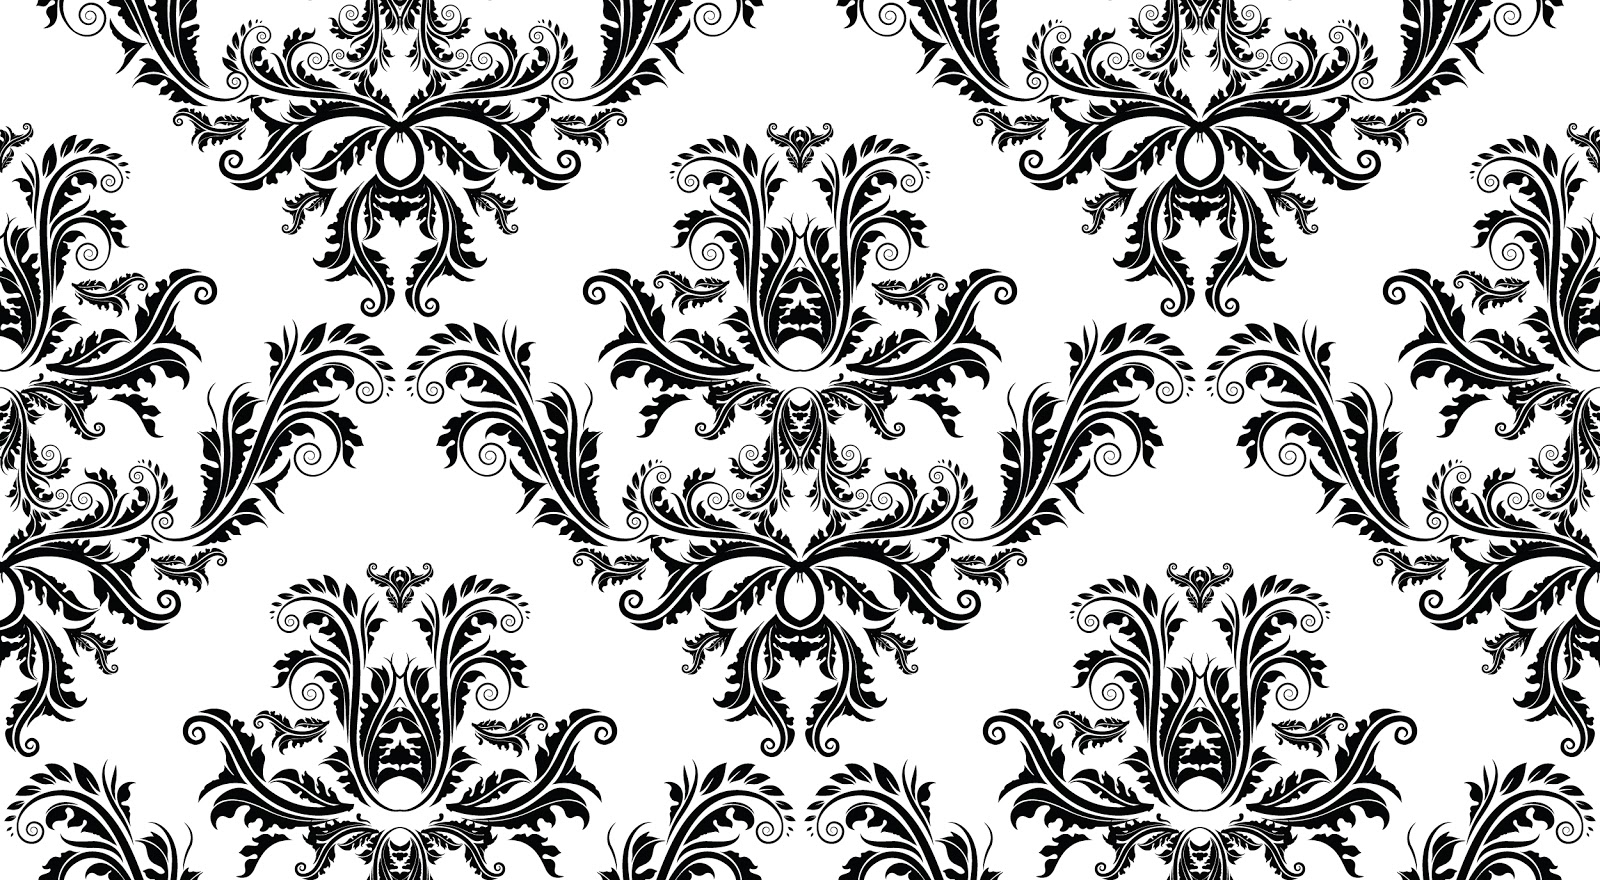 Backgrounds - Vintage Floral Pattern Wallpaper - iPad iPhone HD